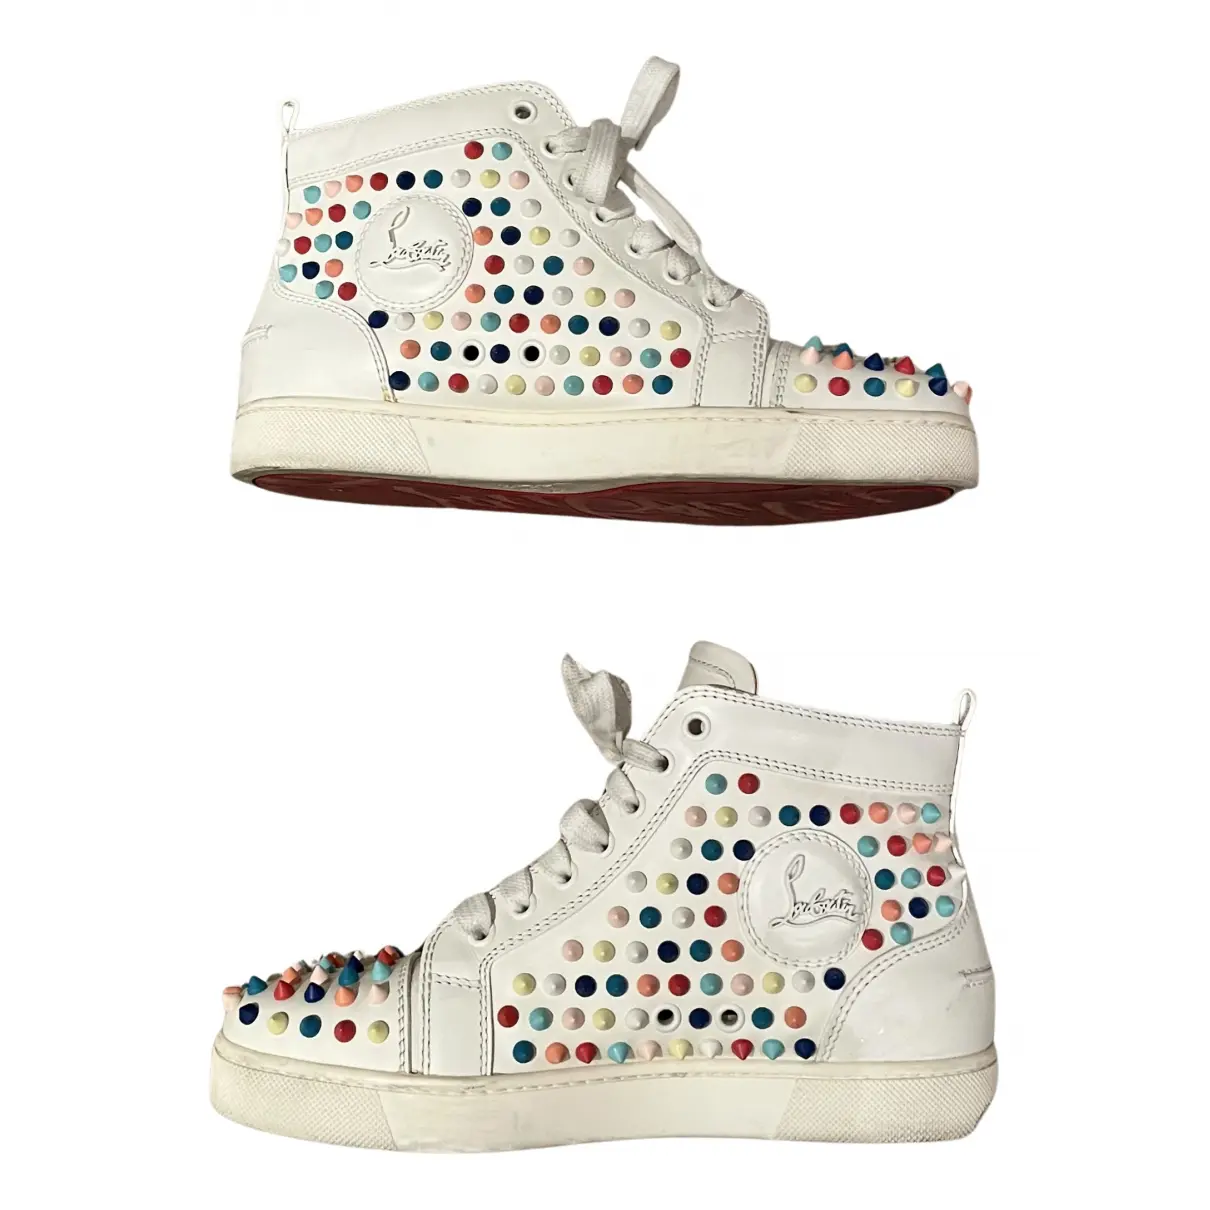 Buy Christian Louboutin Louis leather trainers online